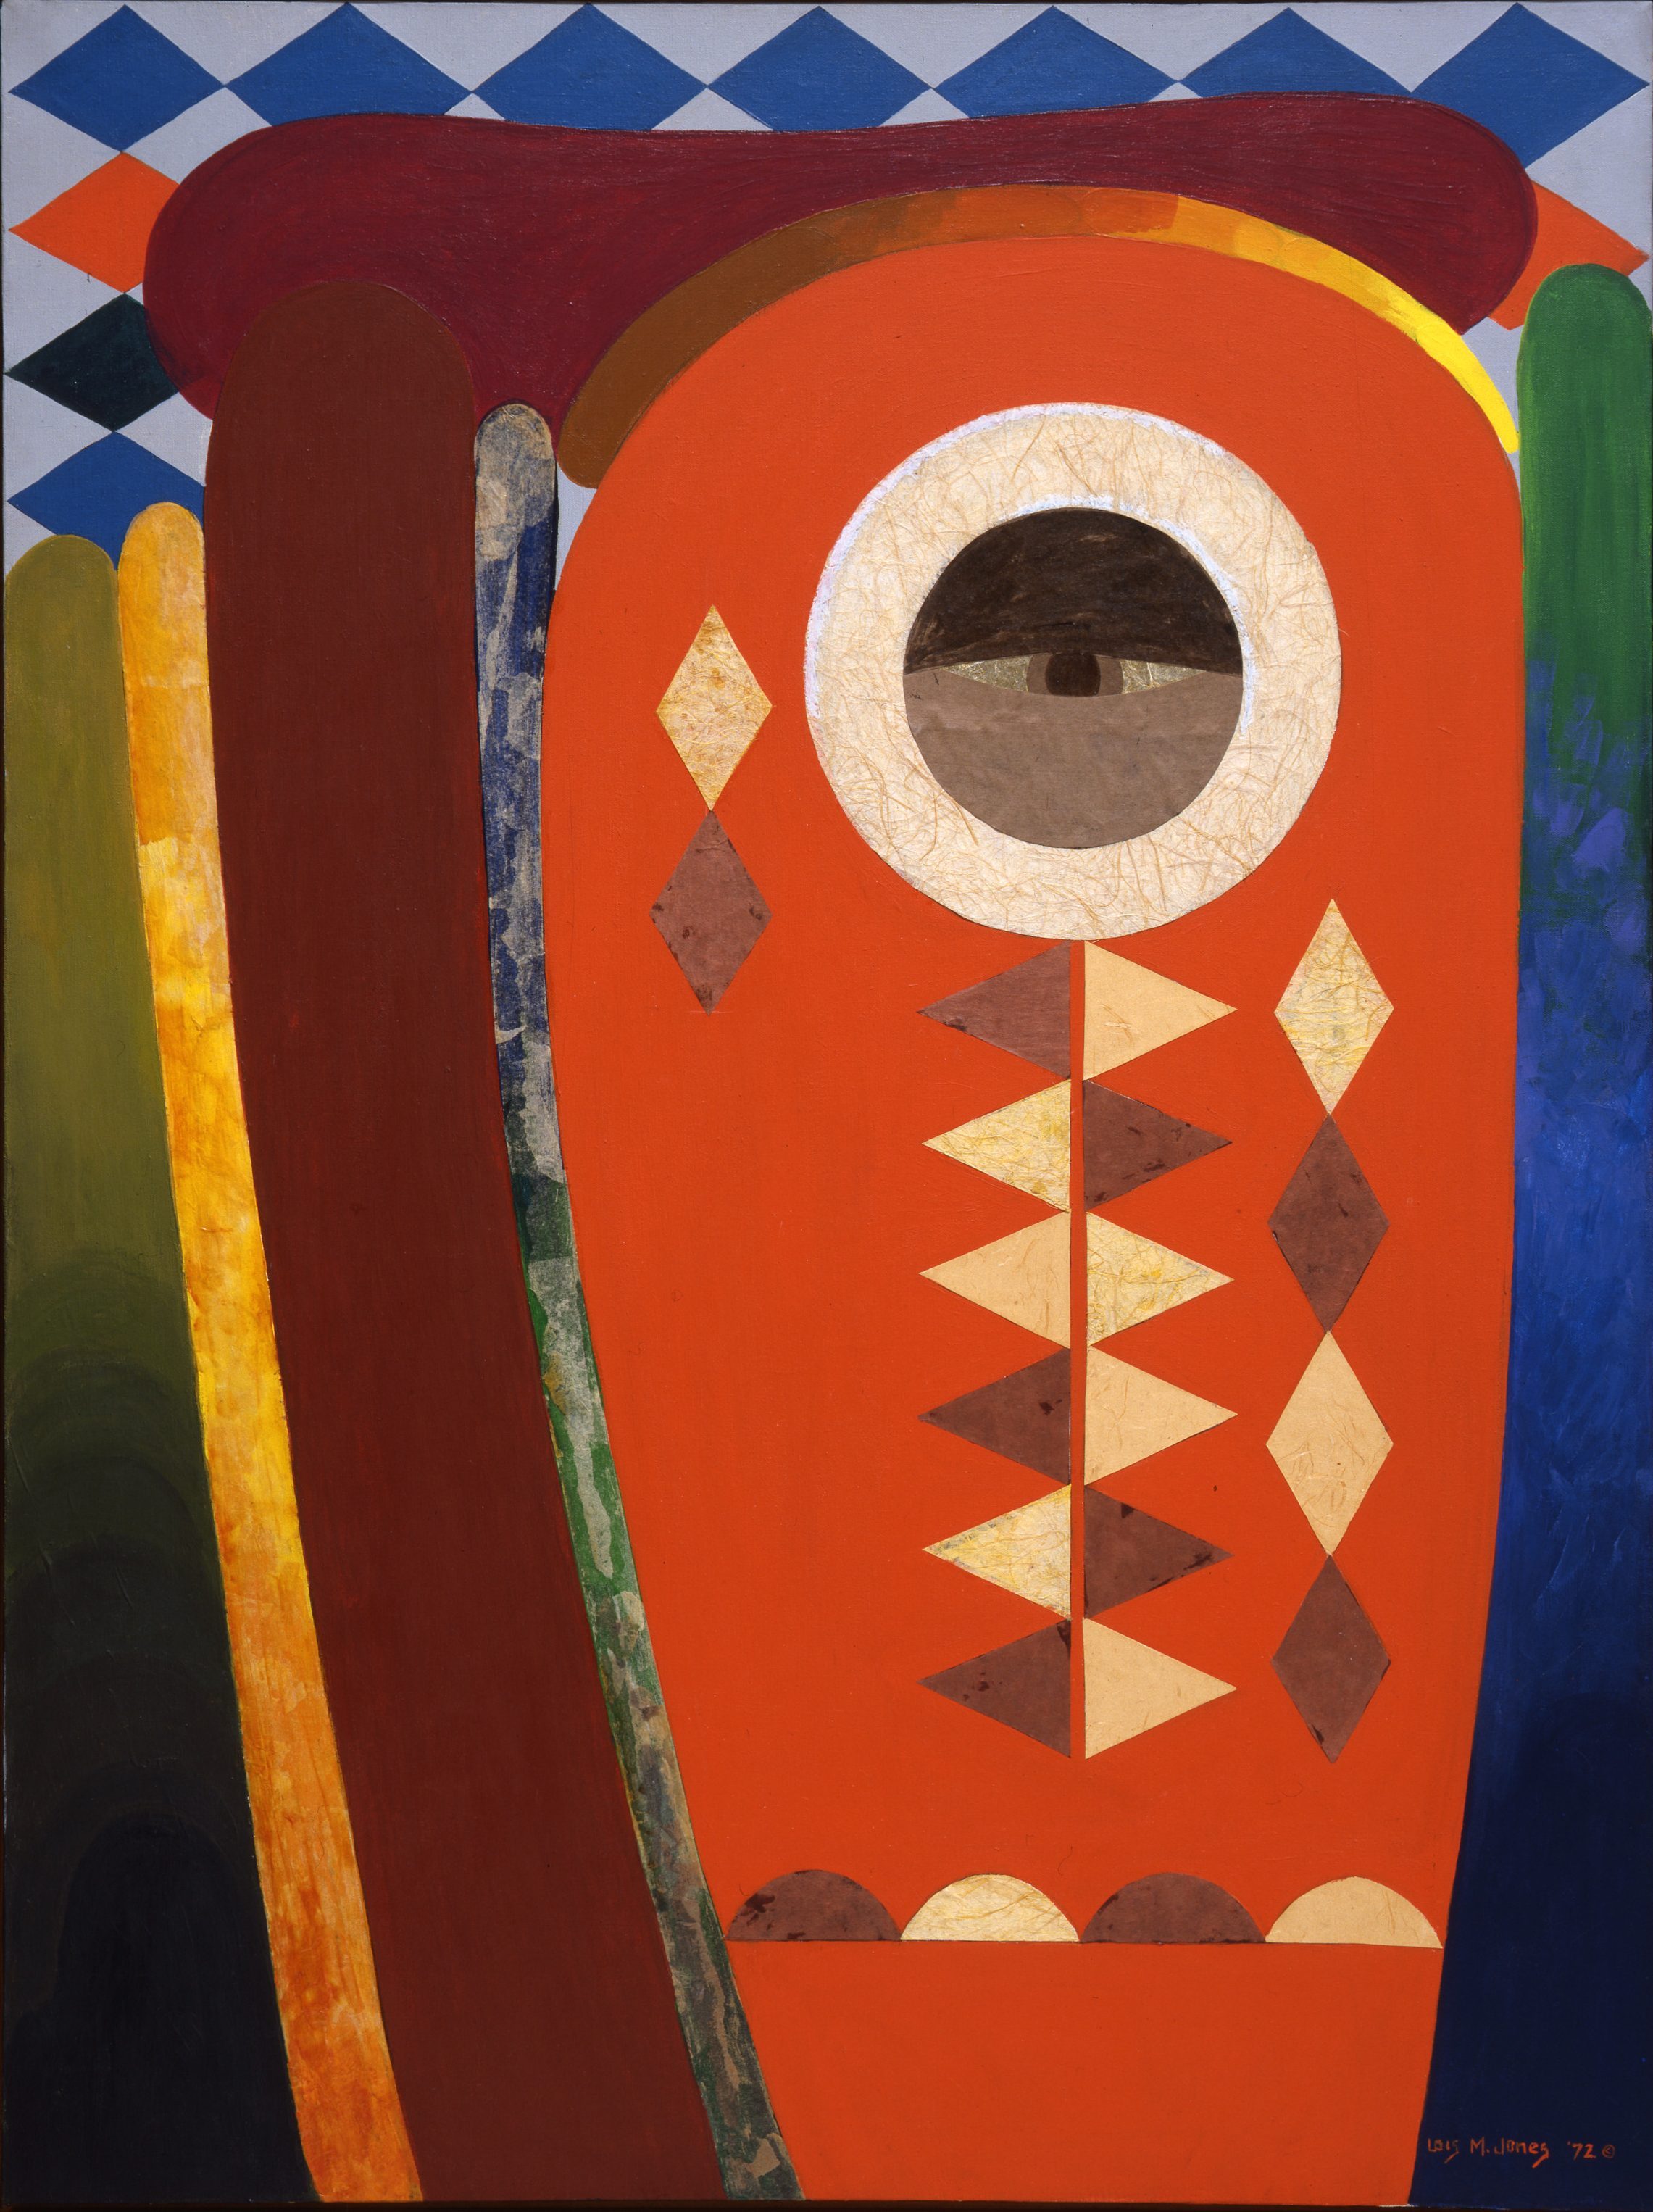 Semi-abstract composition in shades of blue, orange, yellow, green, grey, white and burgundy. In the center, an orange oval with a black and white eye in the center, supported by symmetrical strips of semi-circles and diamonds. Vertical blocks of color reach upwards on both sides.